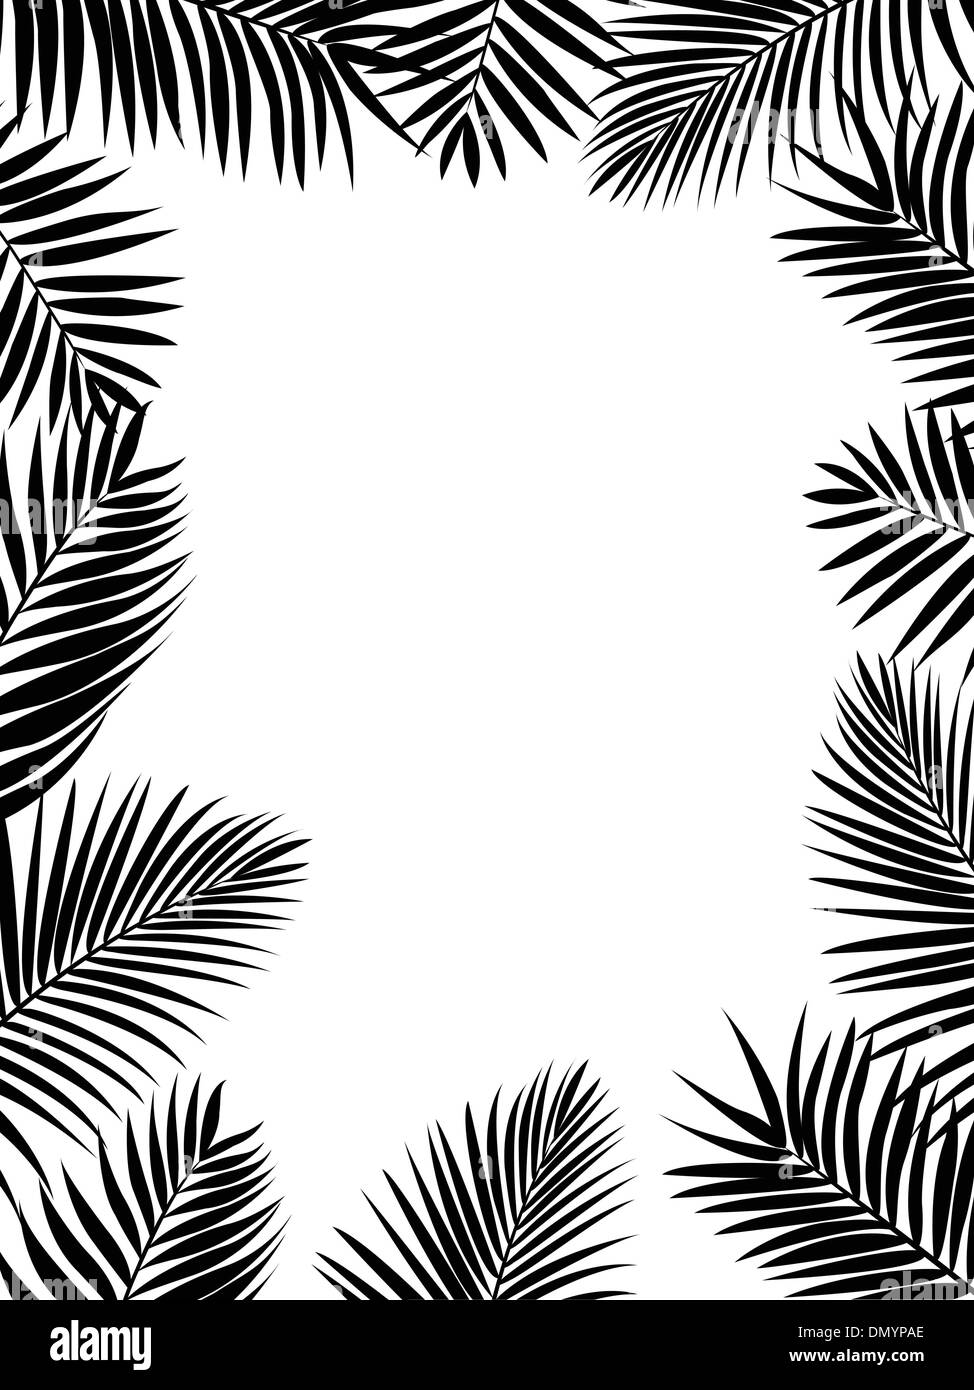 Palm leaf silhouette Stock Vector